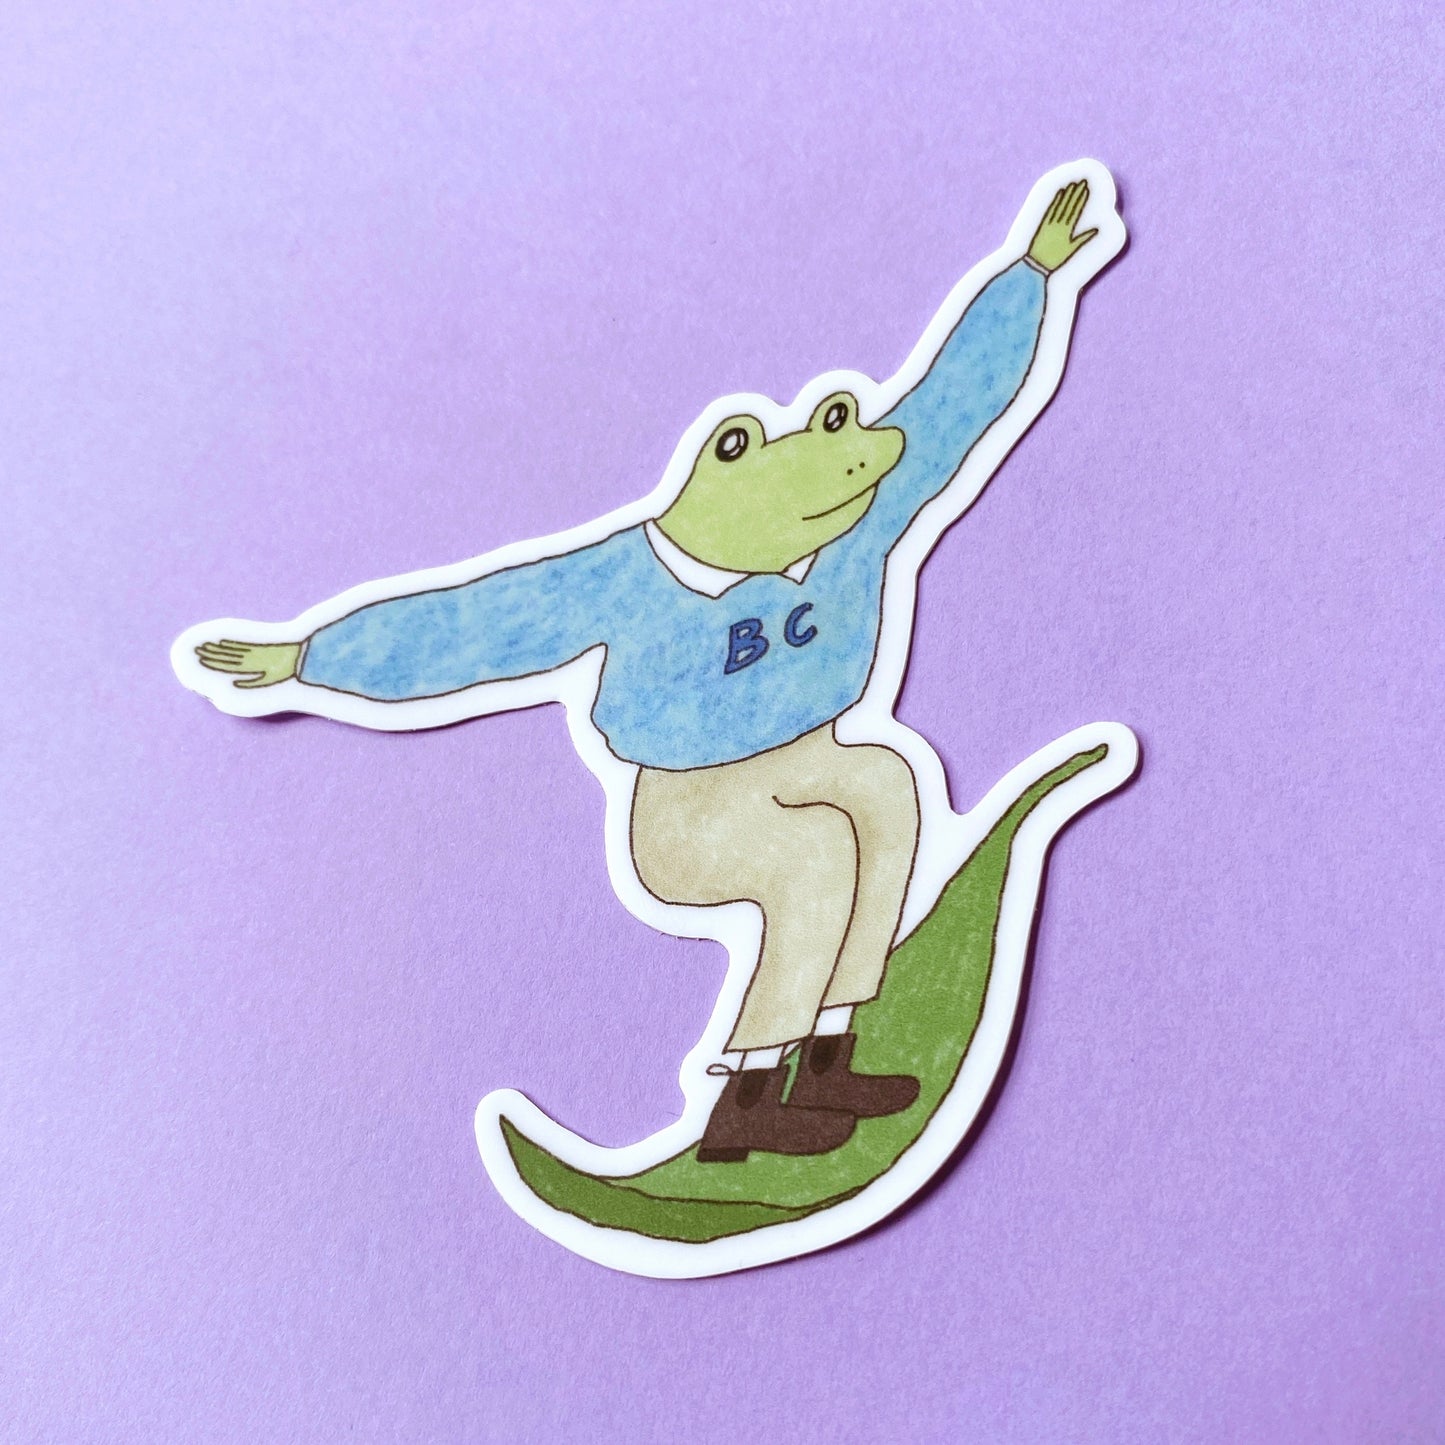 The Surfing Frog in BC Sticker